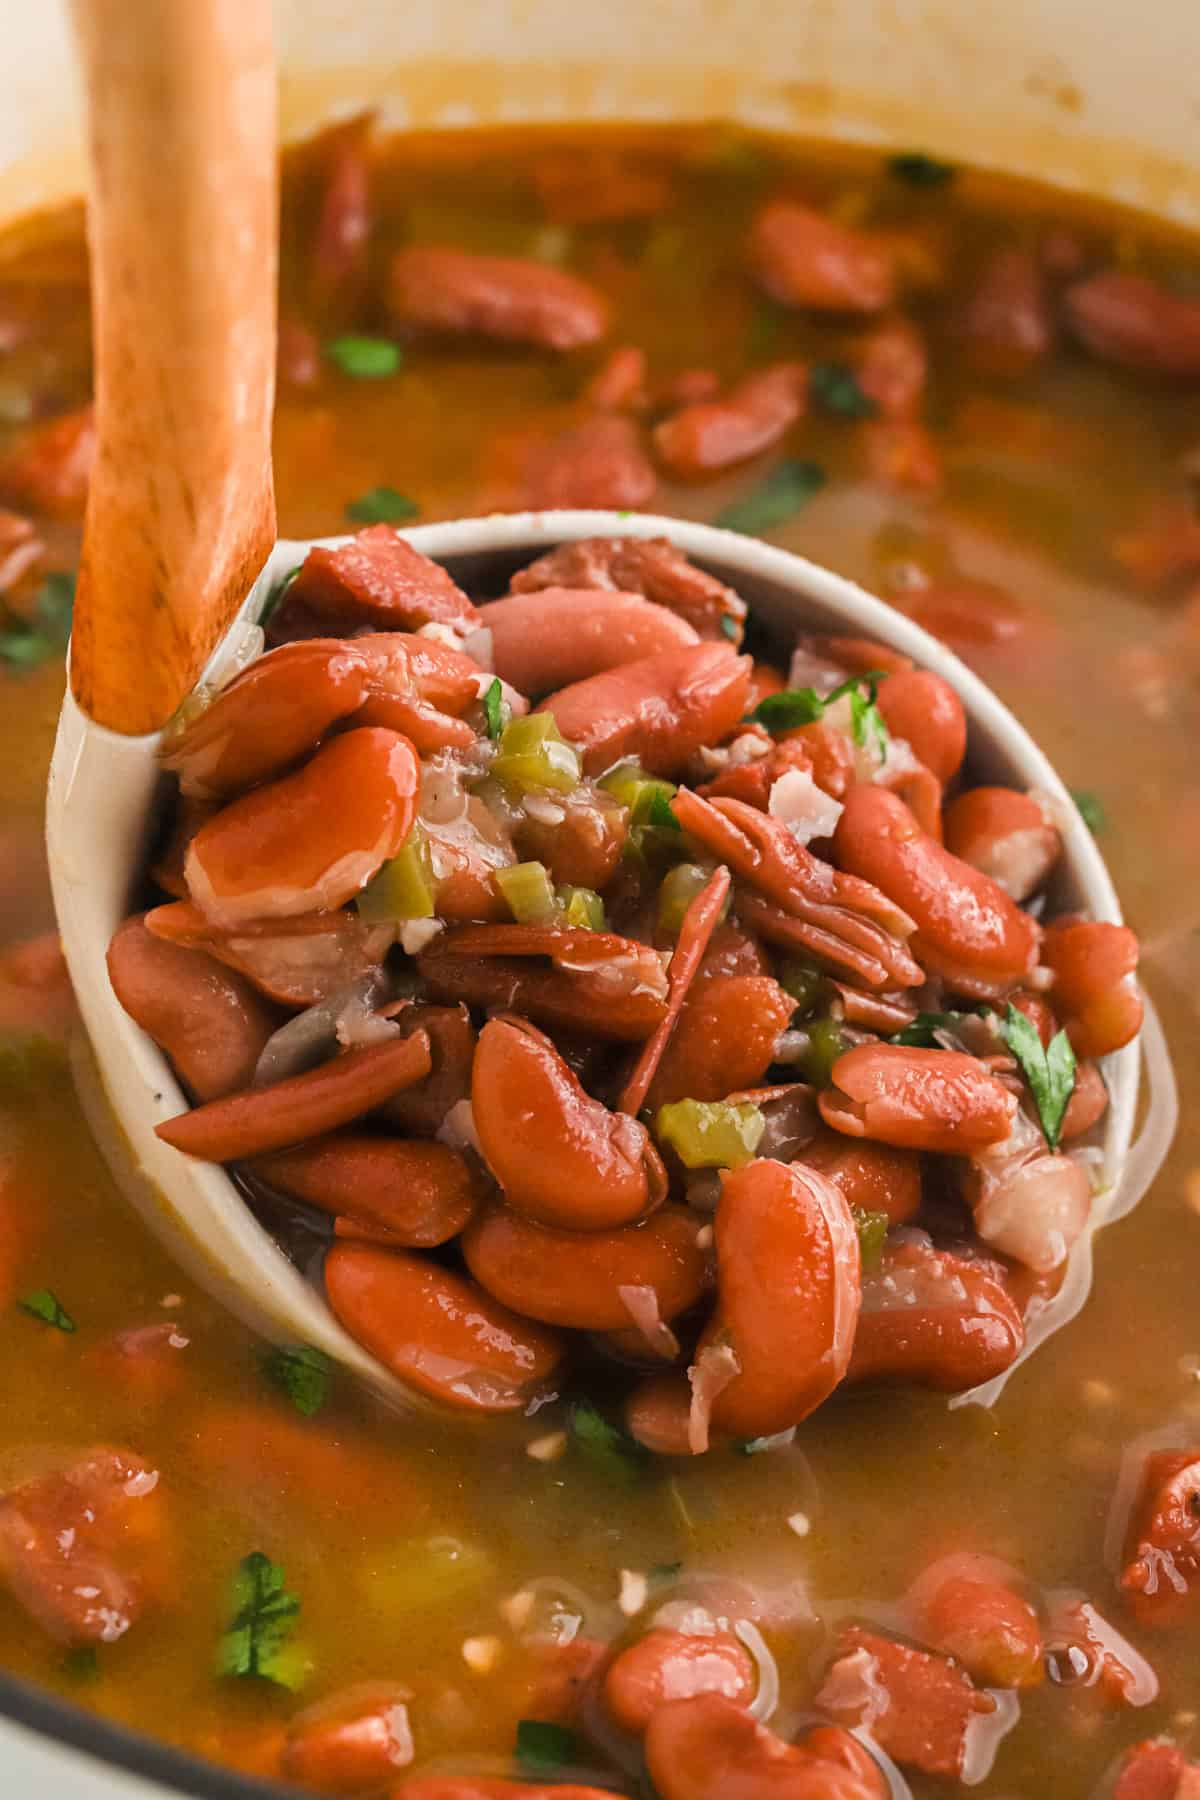 A close up of a ladle of red beans and rice ready to enjoy